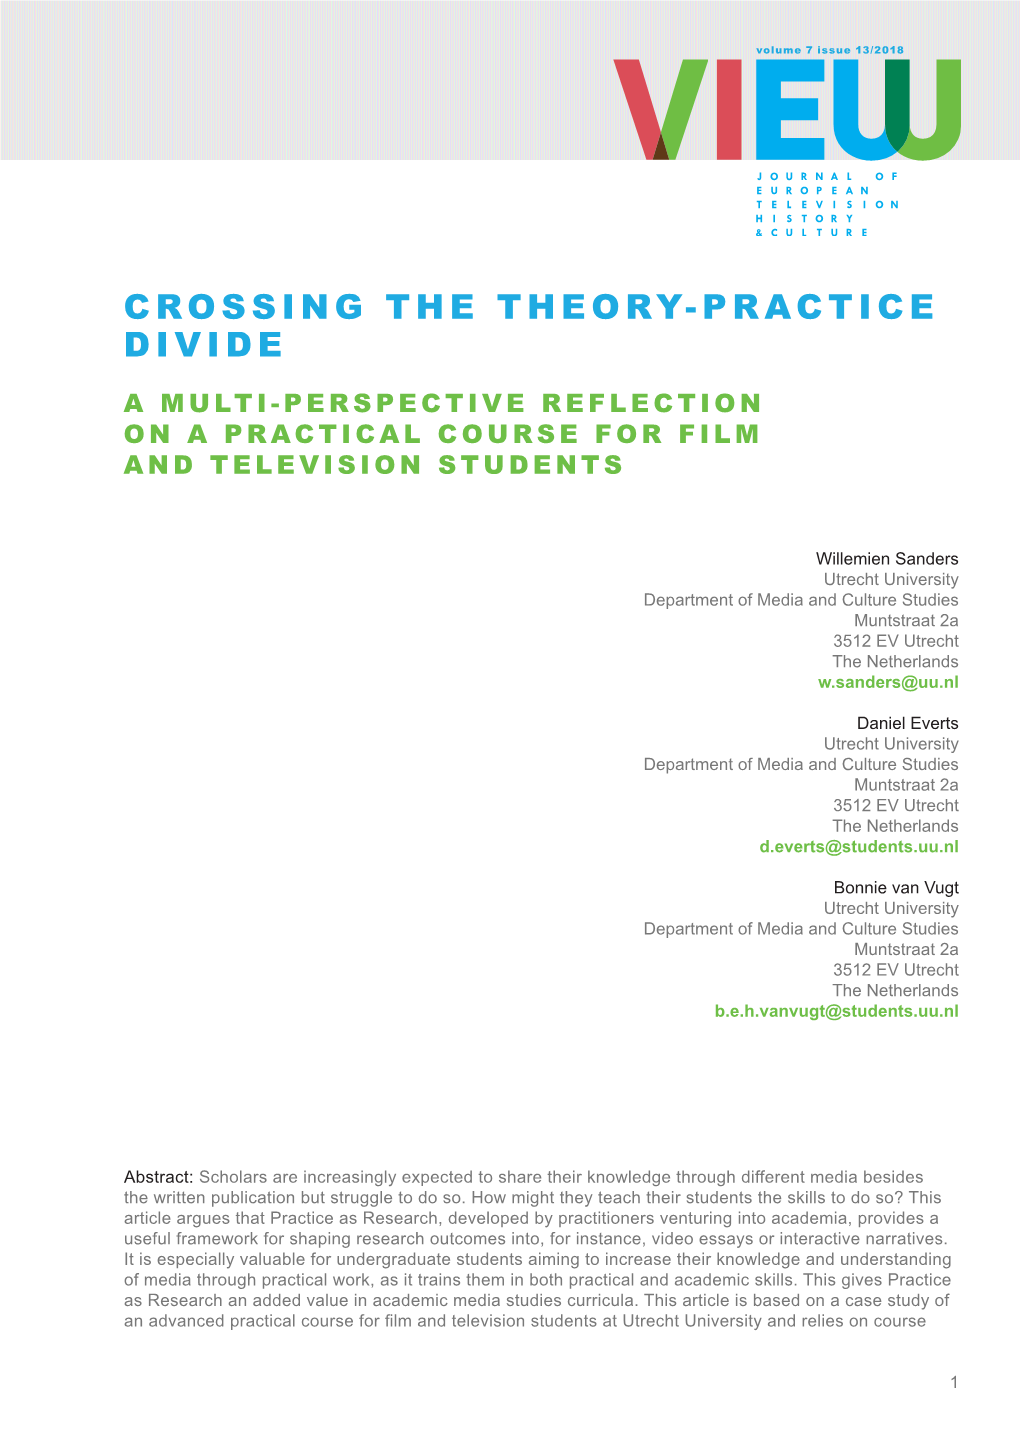 Crossing the Theory-Practice Divide